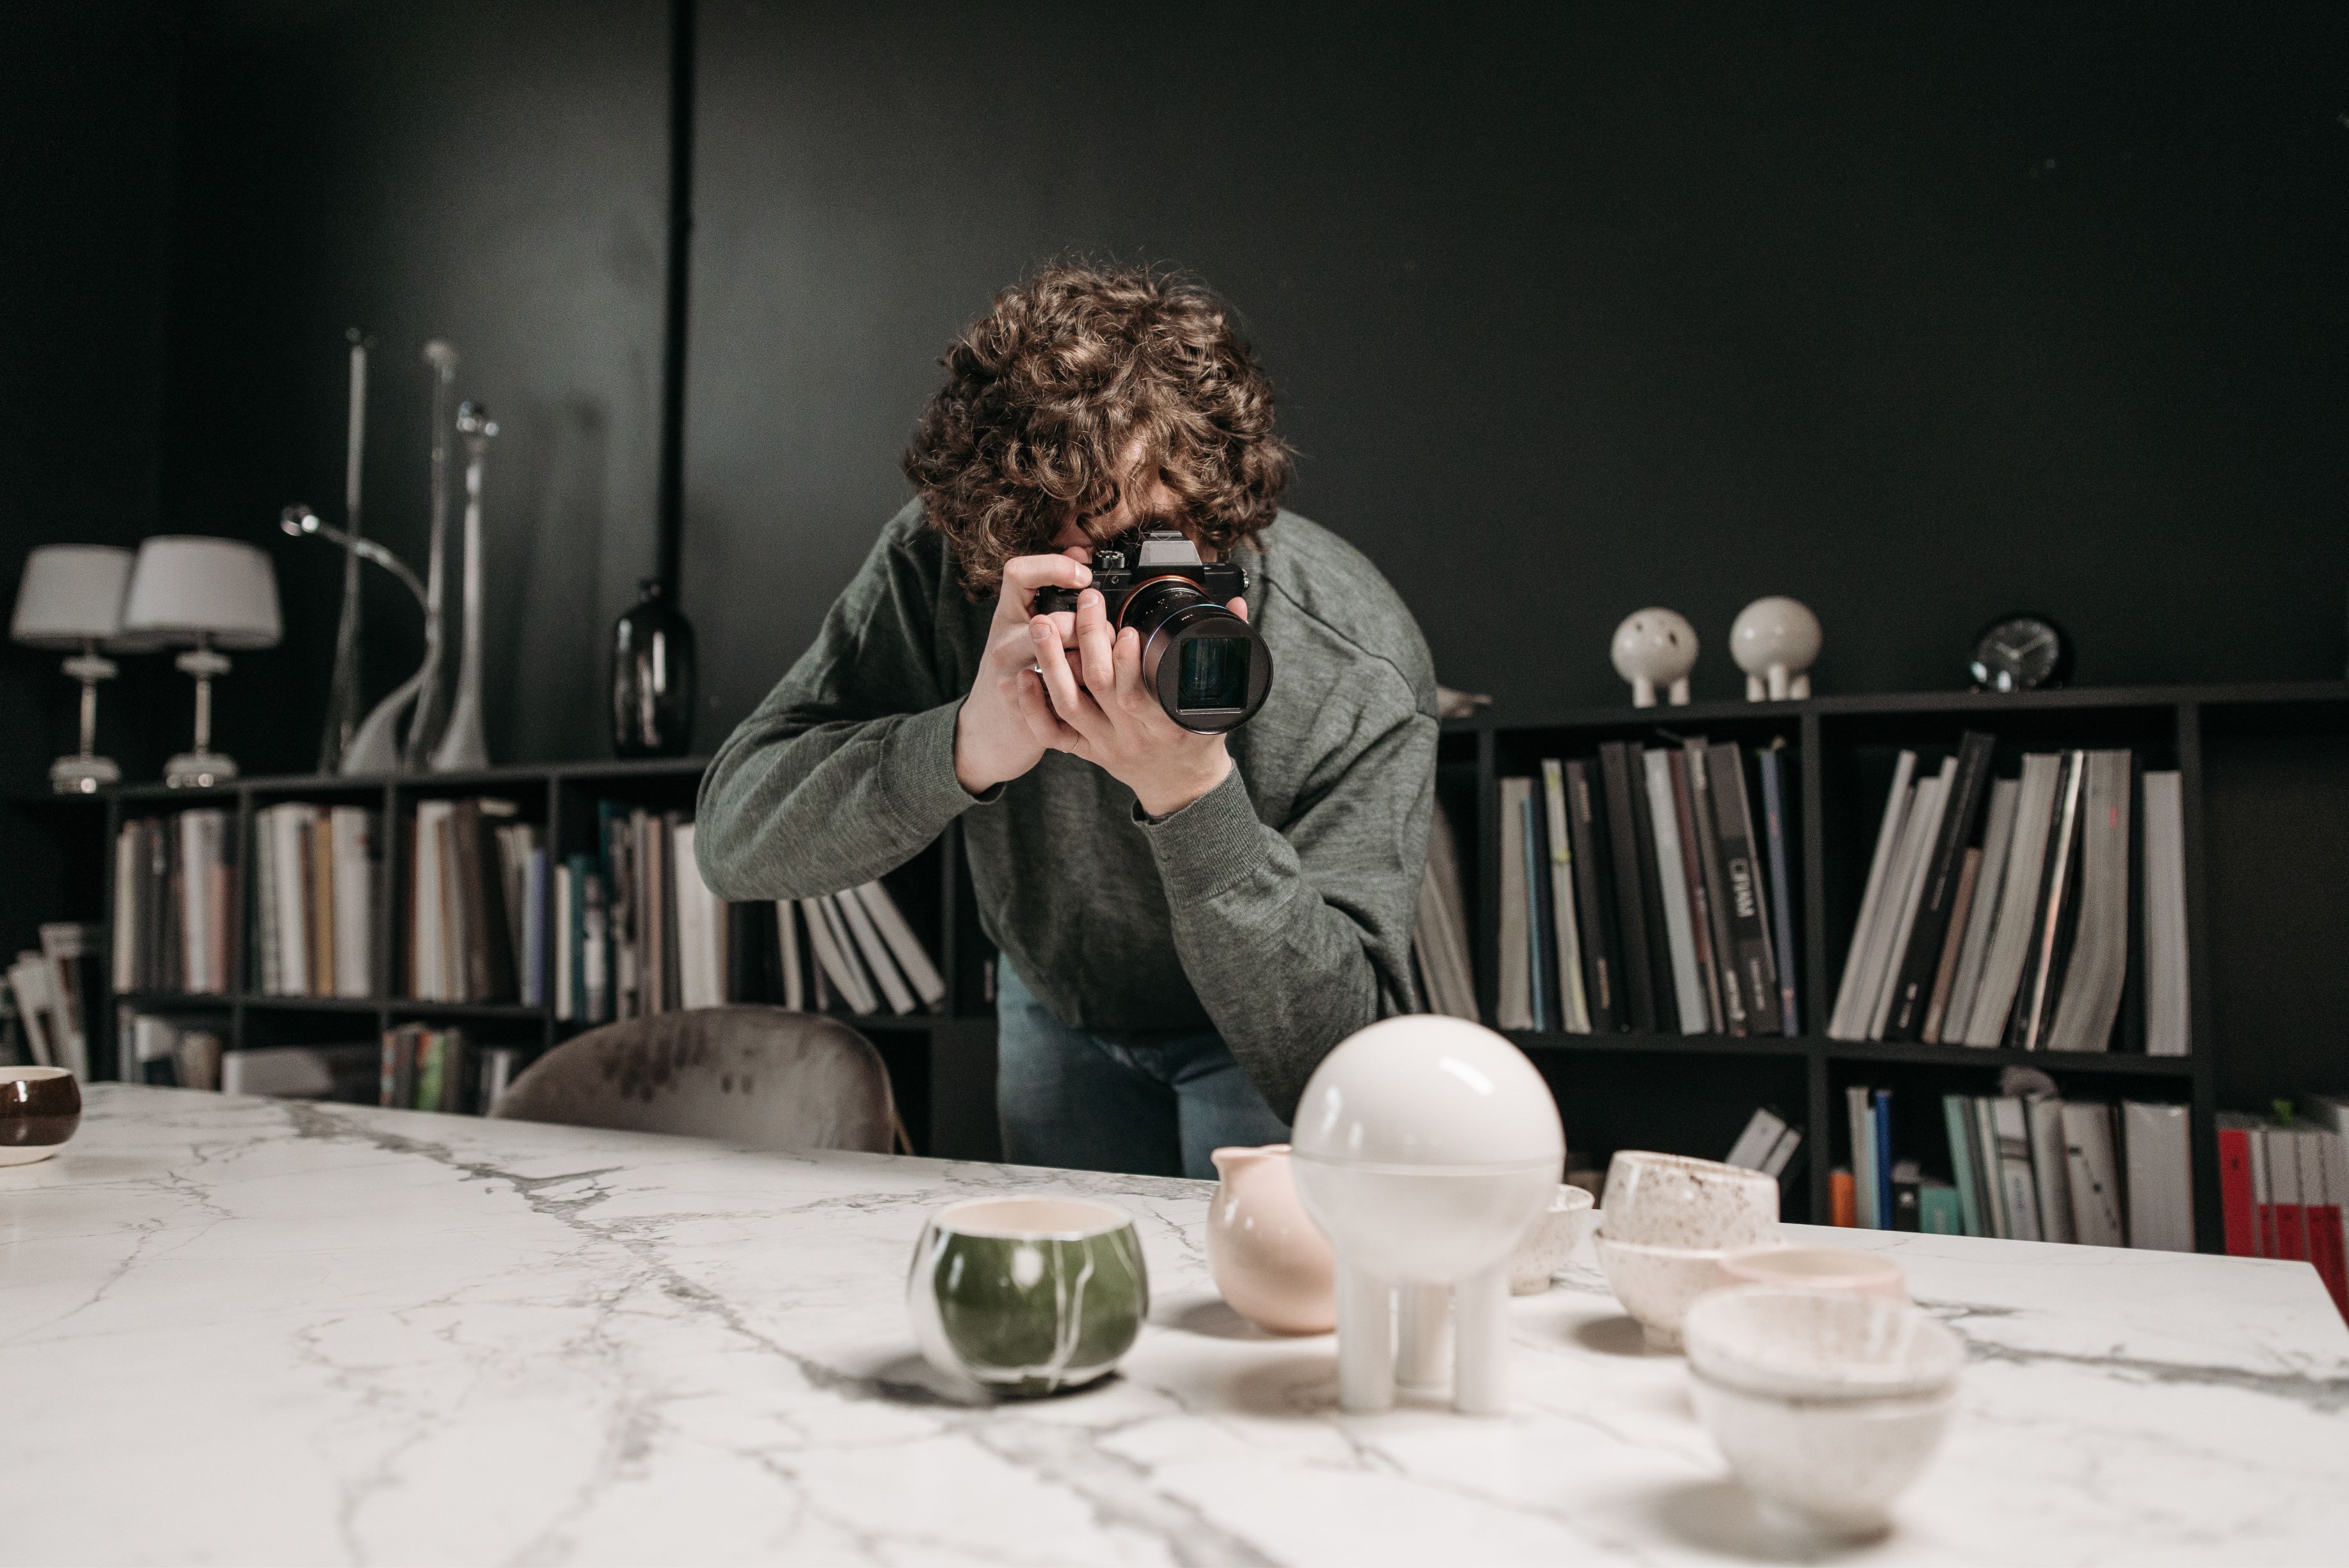 Learn about the art of storytelling through product photography. Find out why creating an emotional connection with your product and audience is crucial.